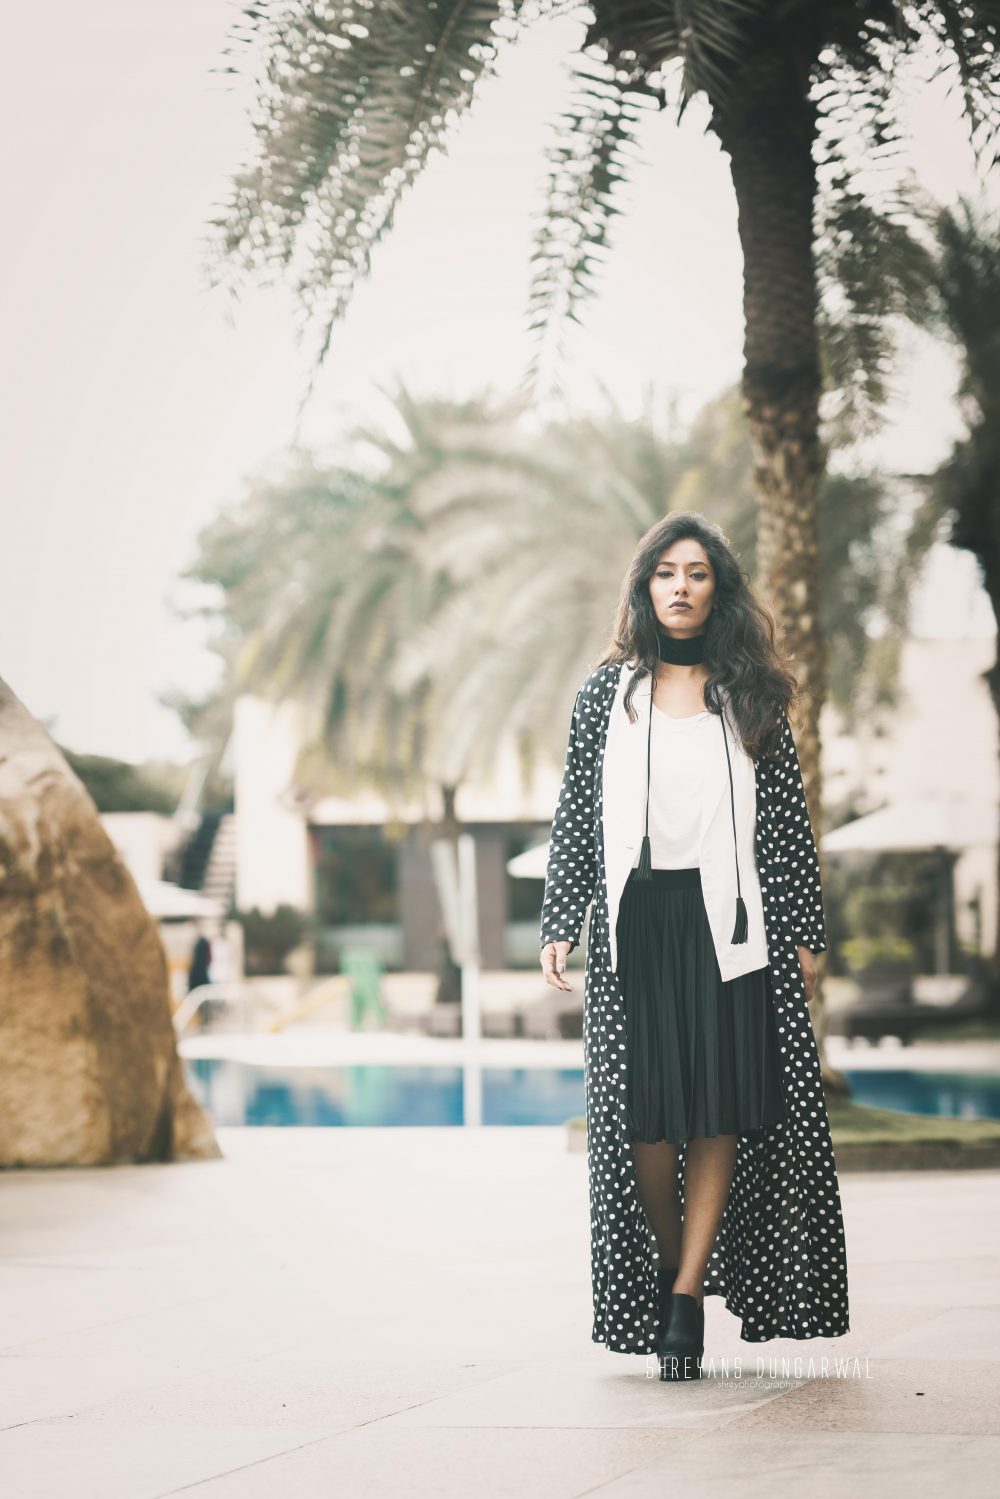  Feature Fashion Style Magazine You and I Hyderabad Blogger Polka Black White Choker Jacket Faballey Code Chemistry India Layering Goth Wine Lips Dark Photography Indian Girl Naznin Suhaer I Dress for the Applause Shoot Cover Girl Interview Lookbook Streetstyle Zaful Fashion 